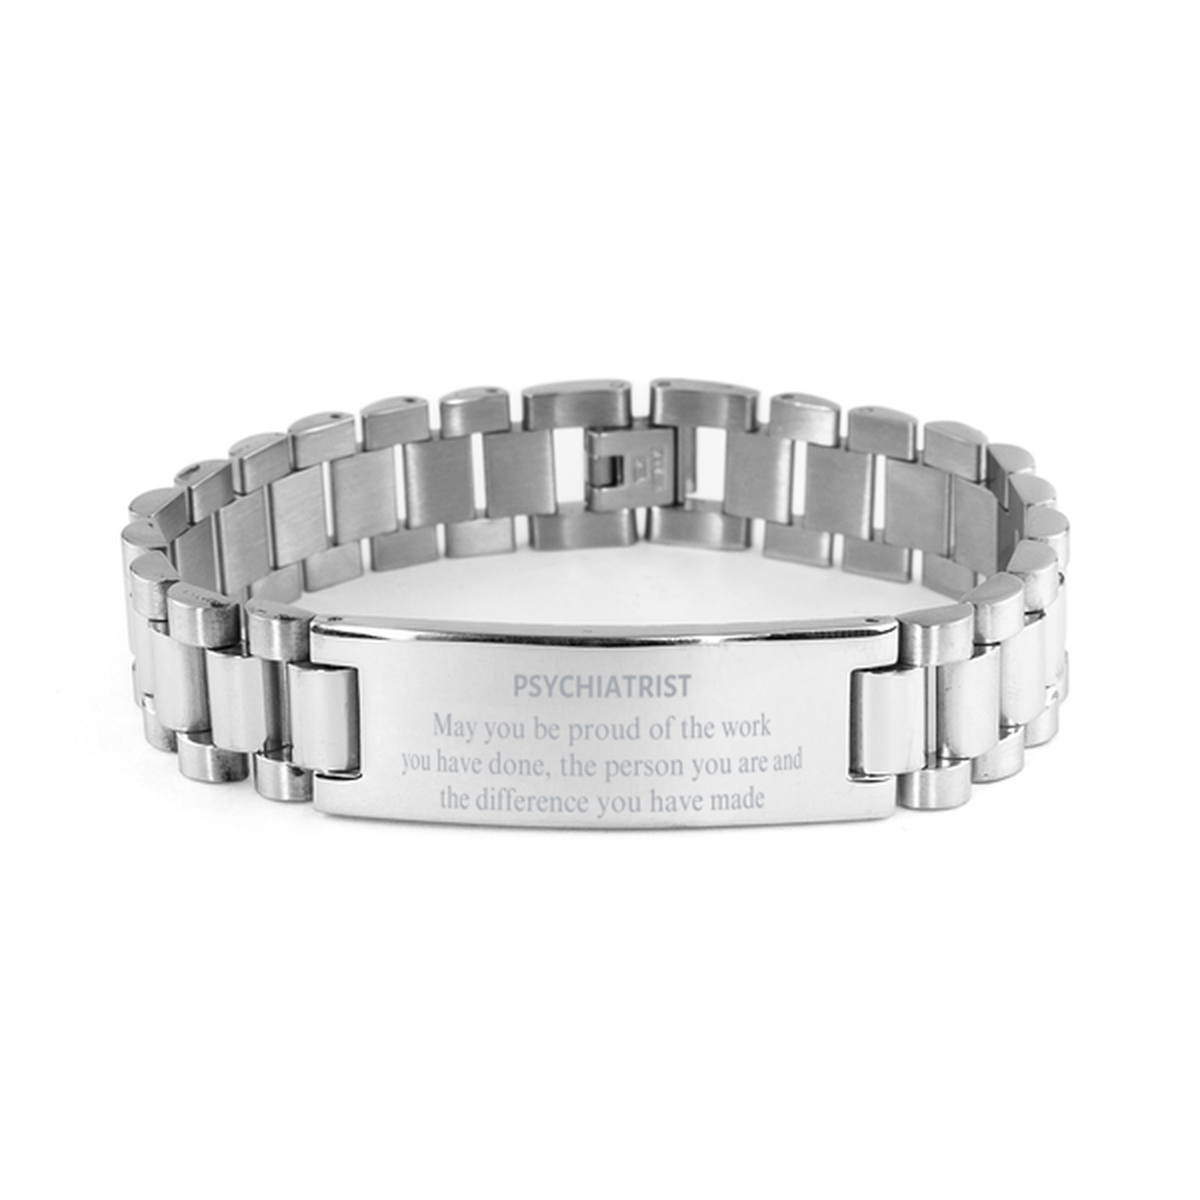 Psychiatrist May you be proud of the work you have done, Retirement Psychiatrist Ladder Stainless Steel Bracelet for Colleague Appreciation Gifts Amazing for Psychiatrist